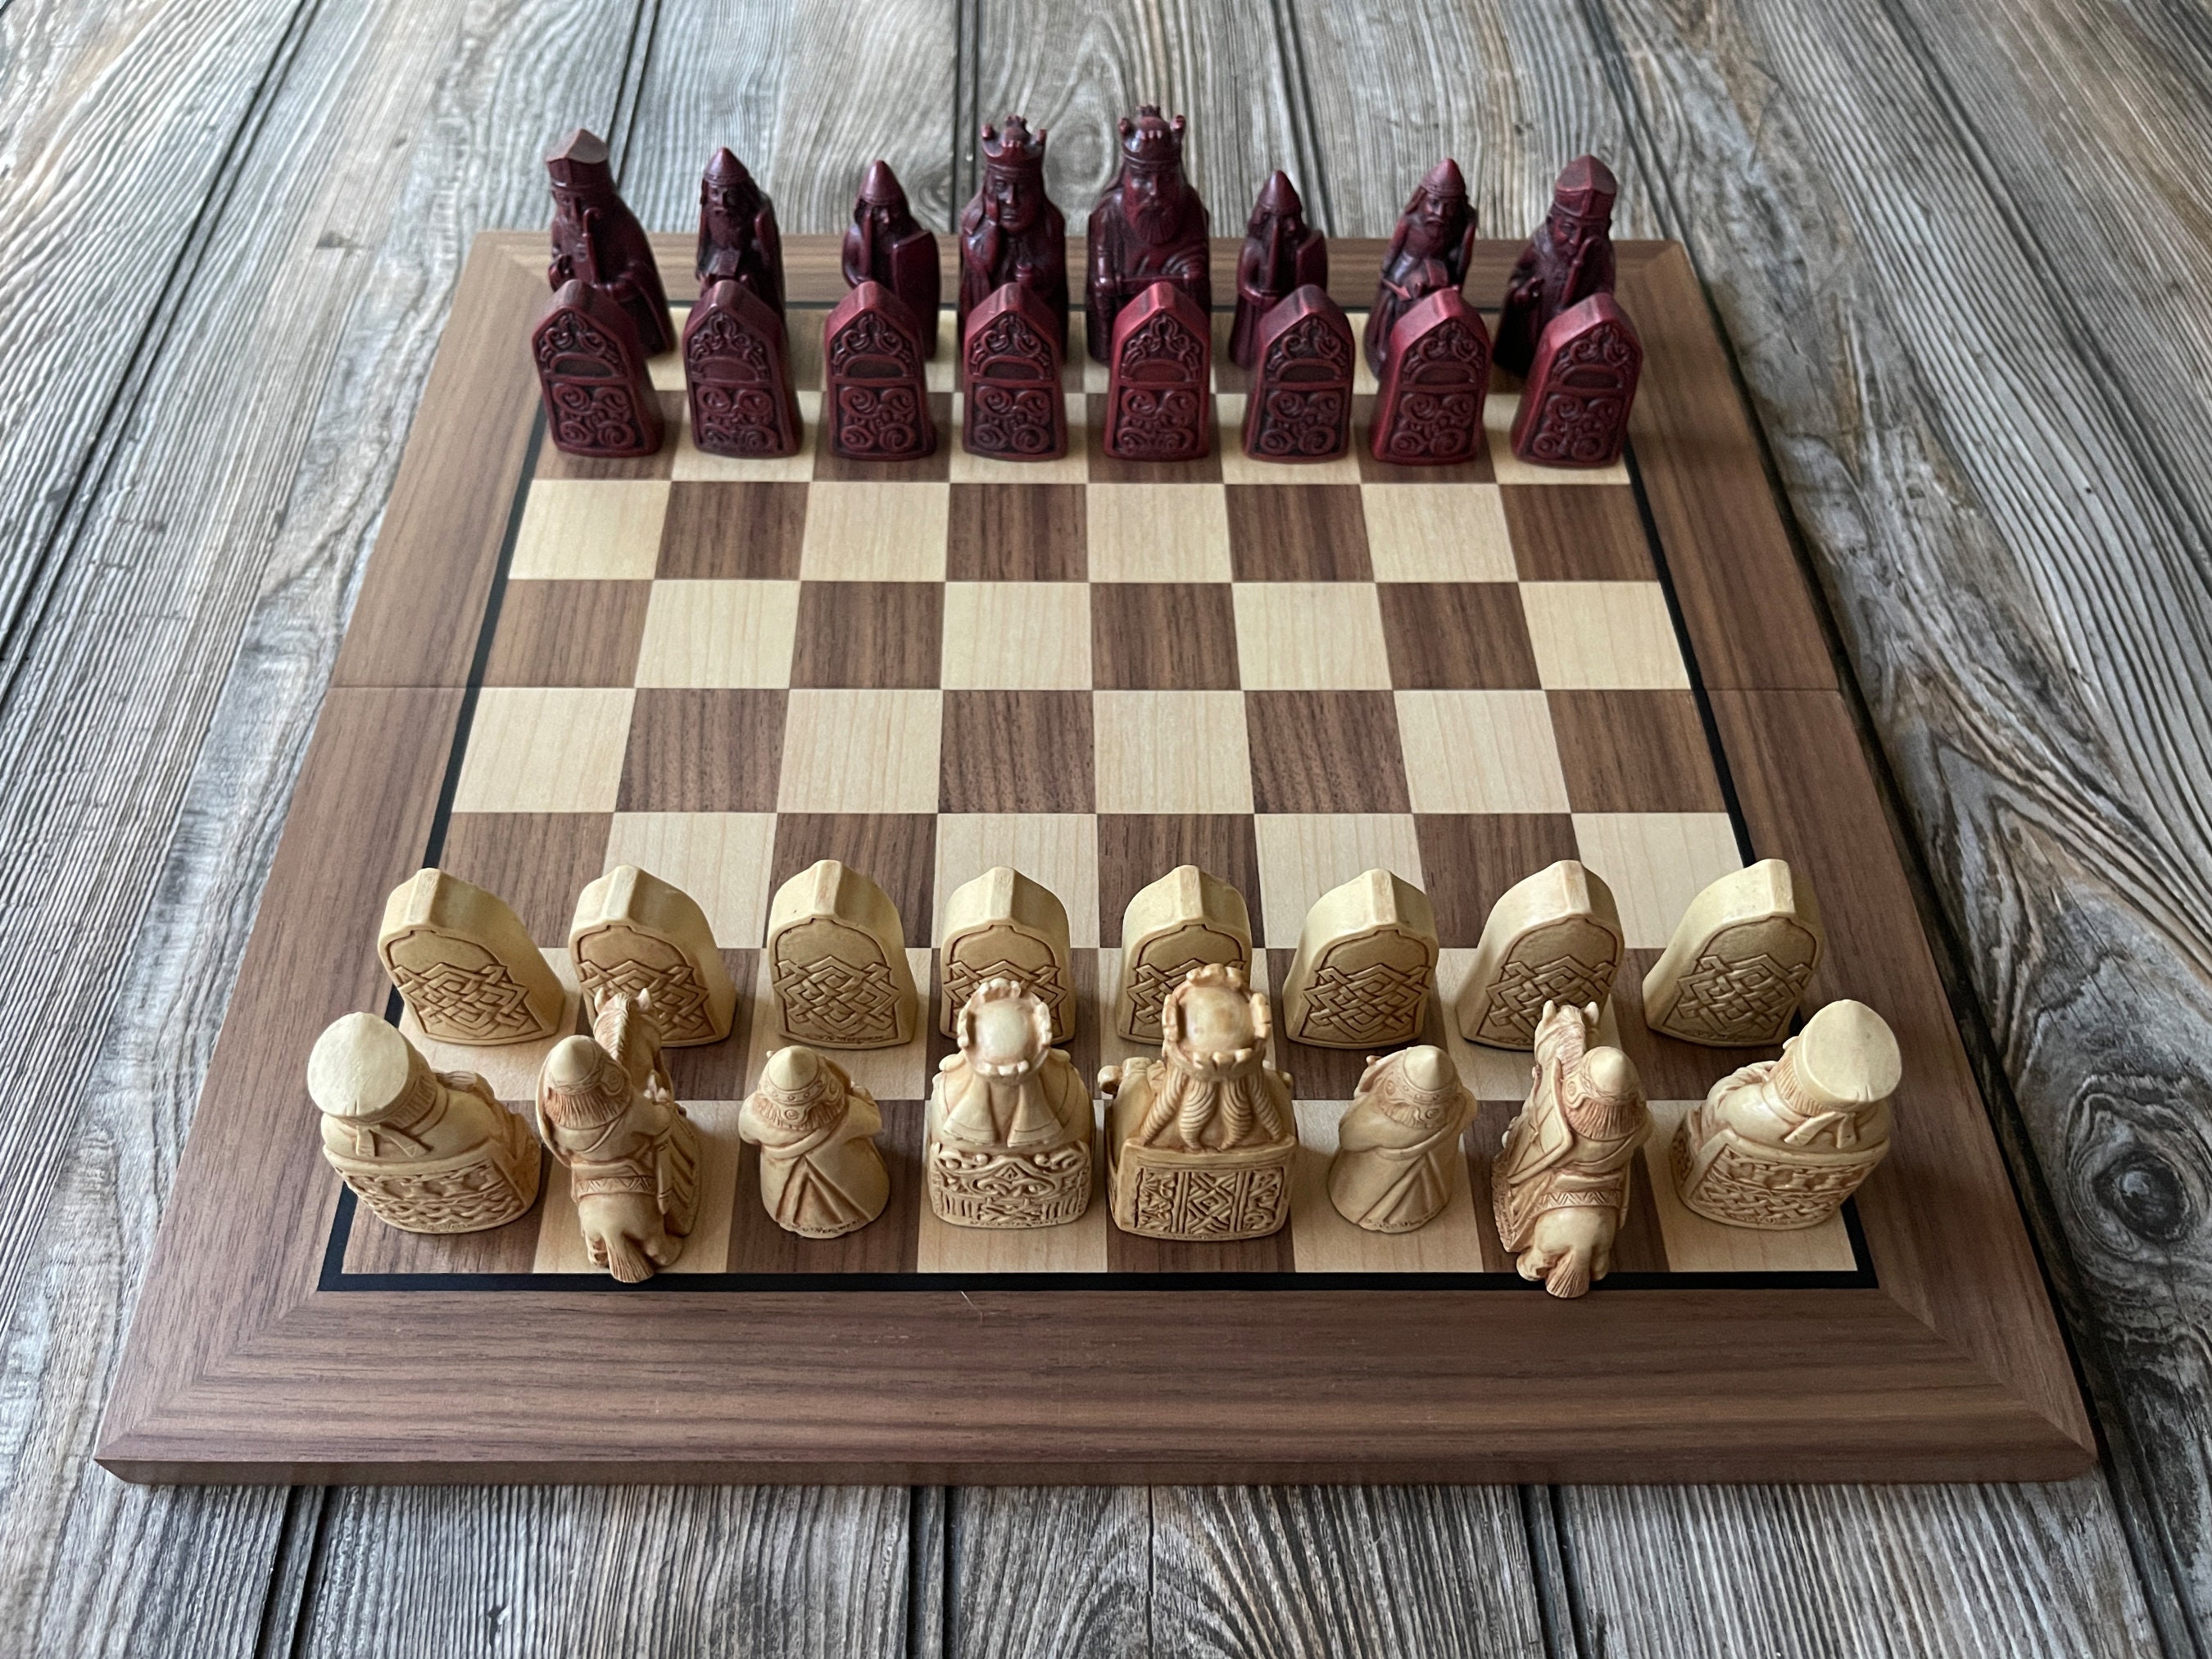 Chess Board Set up Rules & Piece Movement Strategy Cheat Sheet Laminated  Double Sided - Great for Beginners and Improving Your Chess Game!